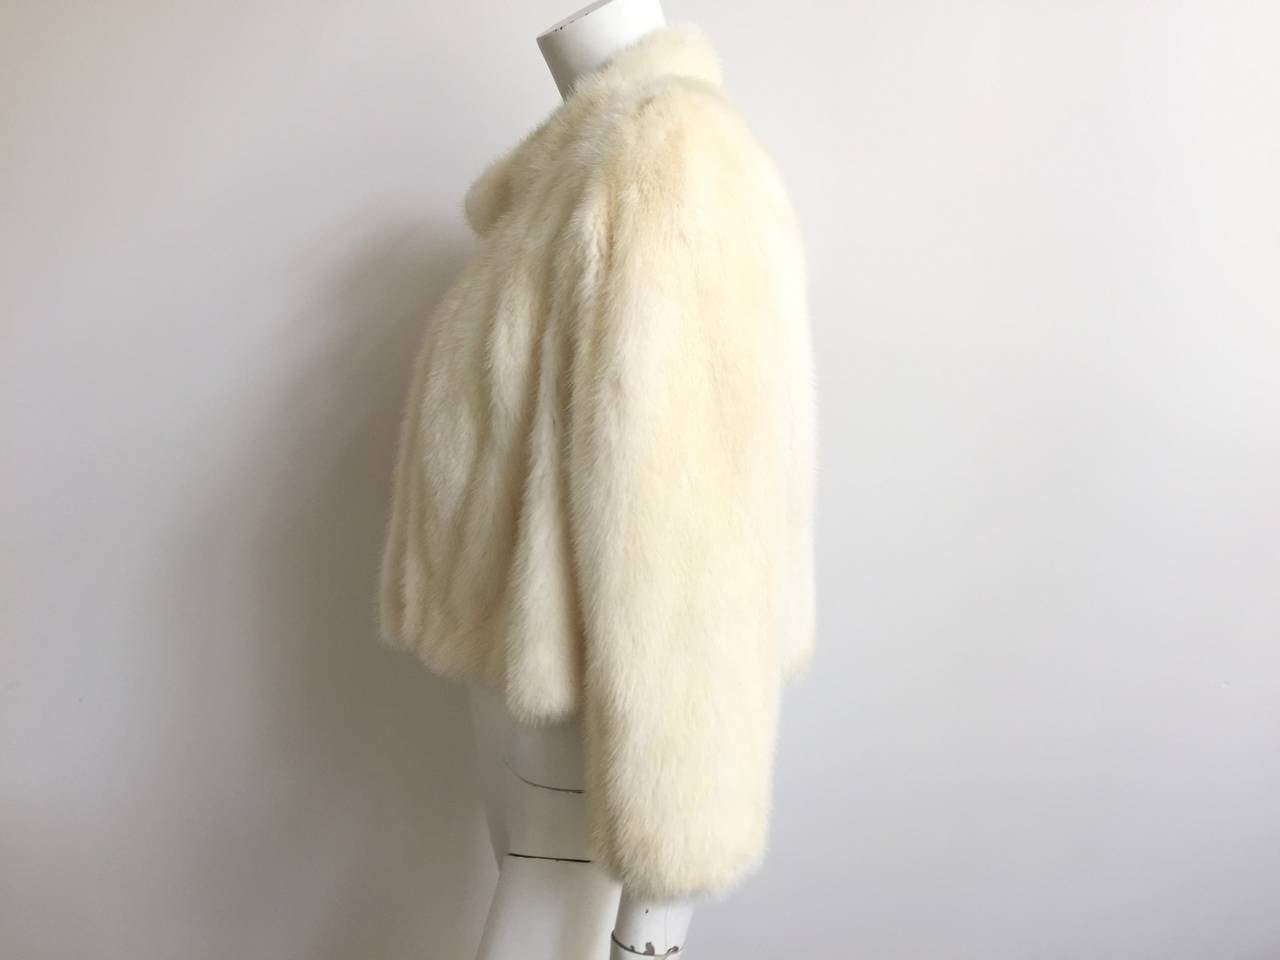 Guy Laroche 1960s Fourrures off white mink fur jacket made in France. There is a single hook to close jacket as shown in photo. Ladies if you are looking to buy a fur coat this season please buy vintage instead of buying a brand new fur coat.